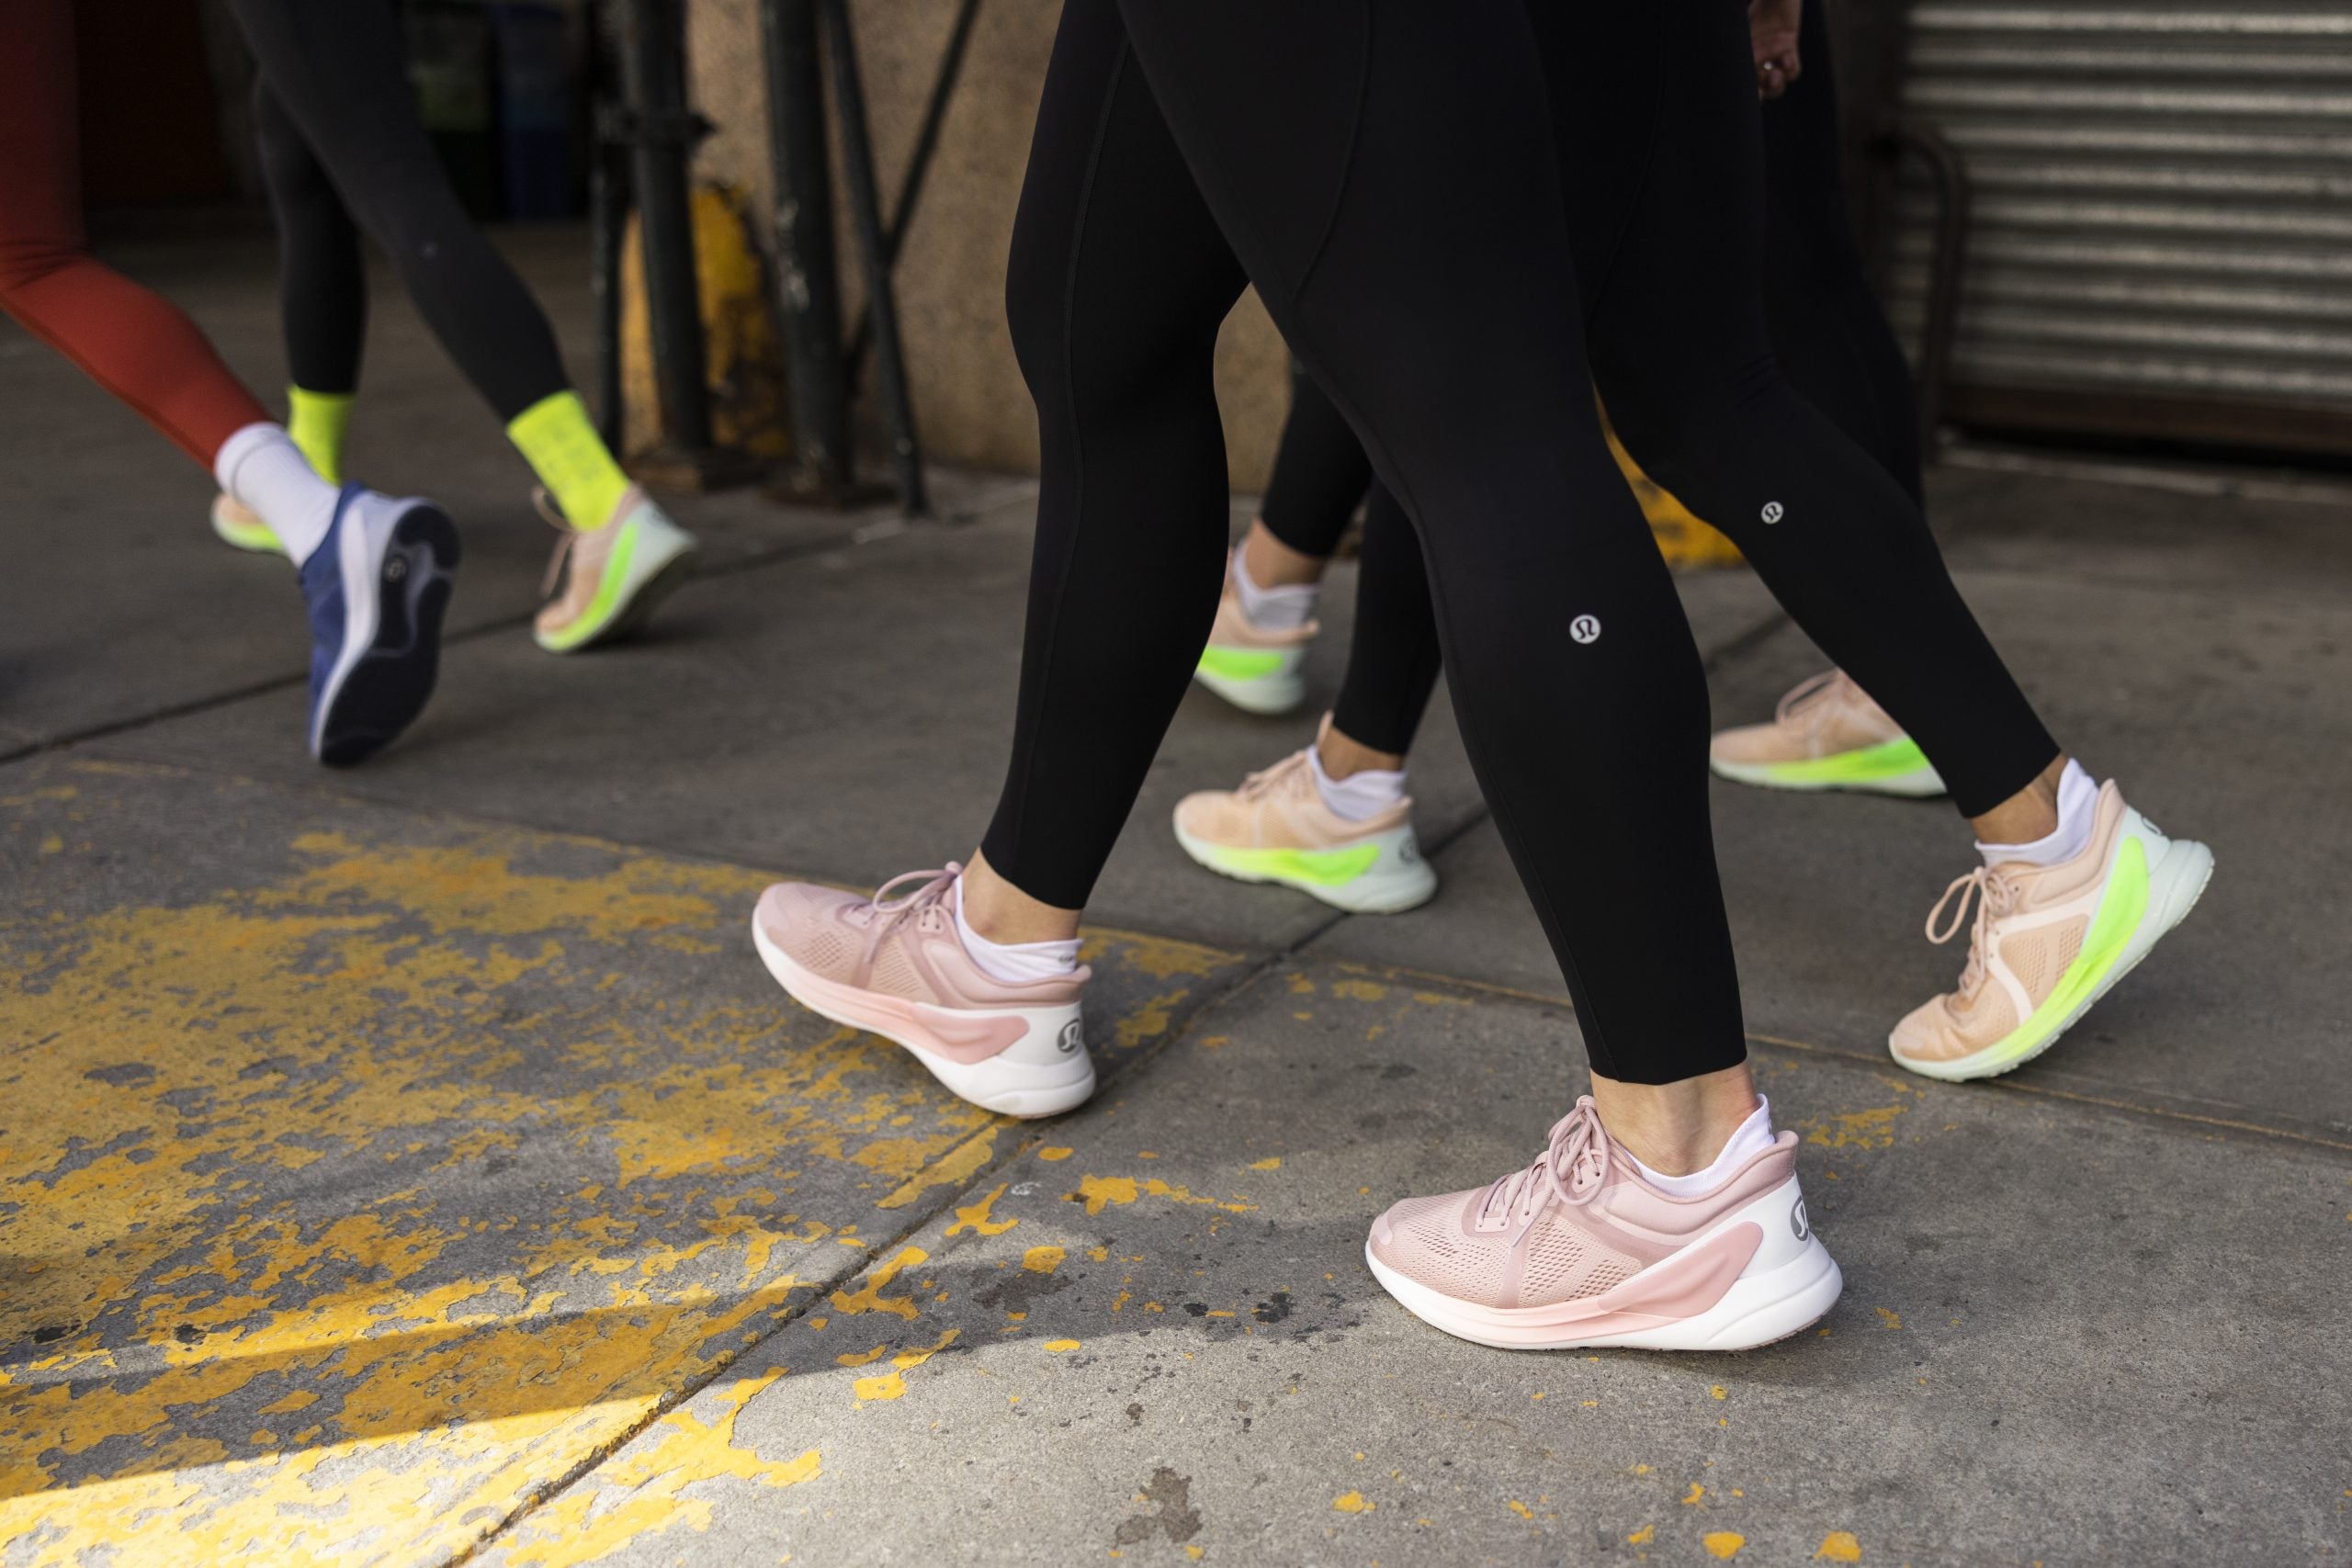 Women-First Wear: lululemon Leaps Into The Footwear Category With Its First-Ever Women’s Running Shoe